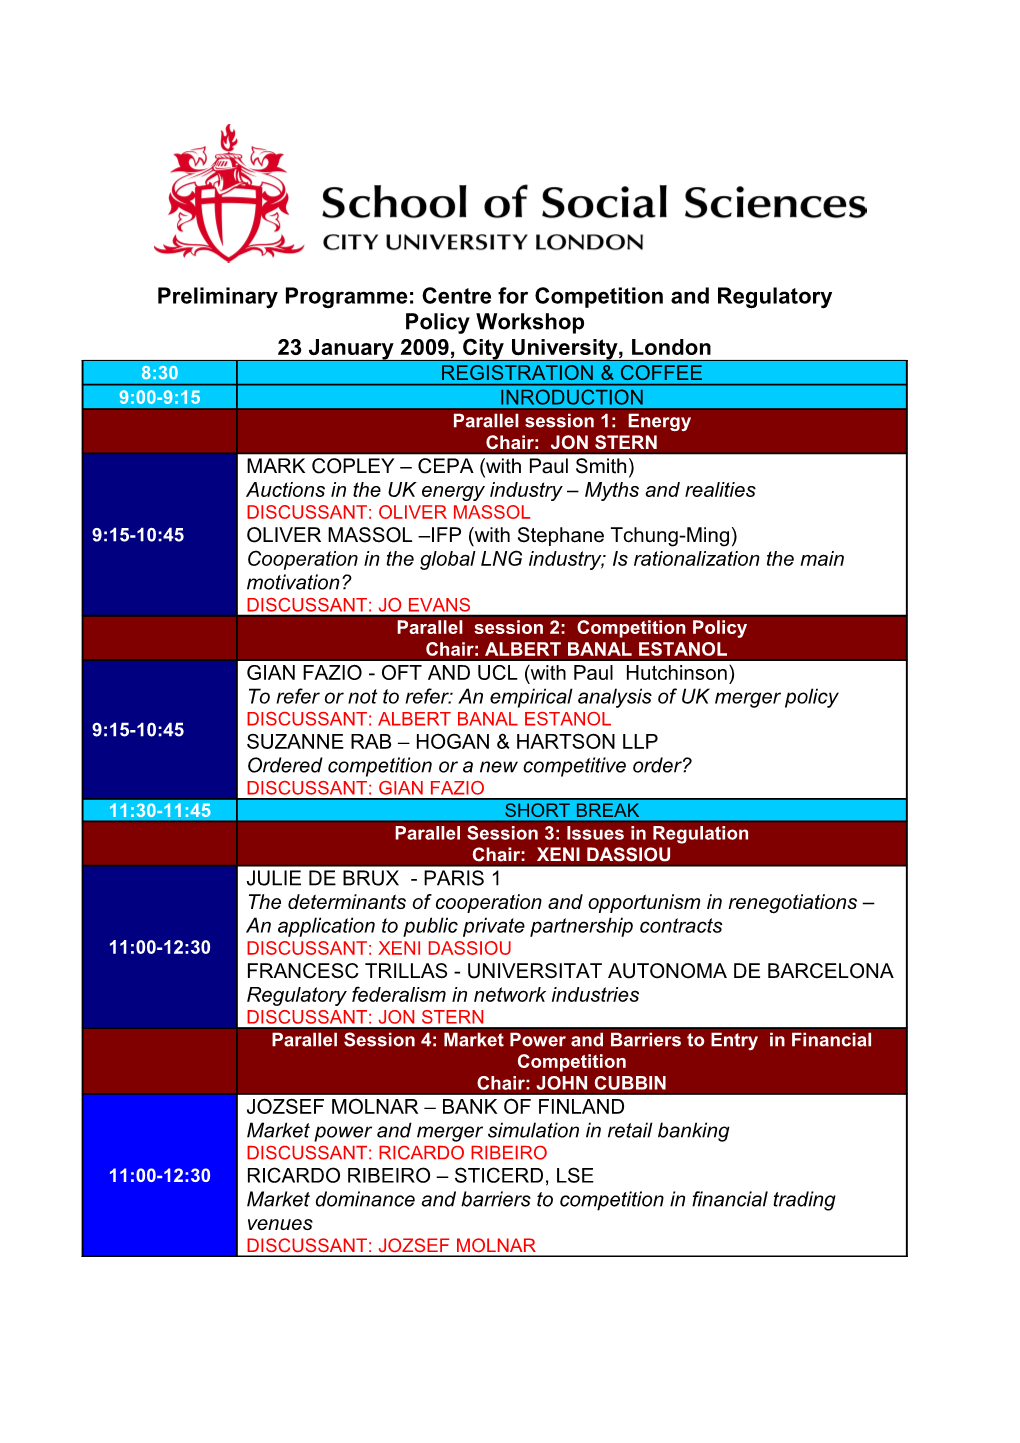 Preliminary Programme: Centre for Competition and Regulatory Policy Workshop